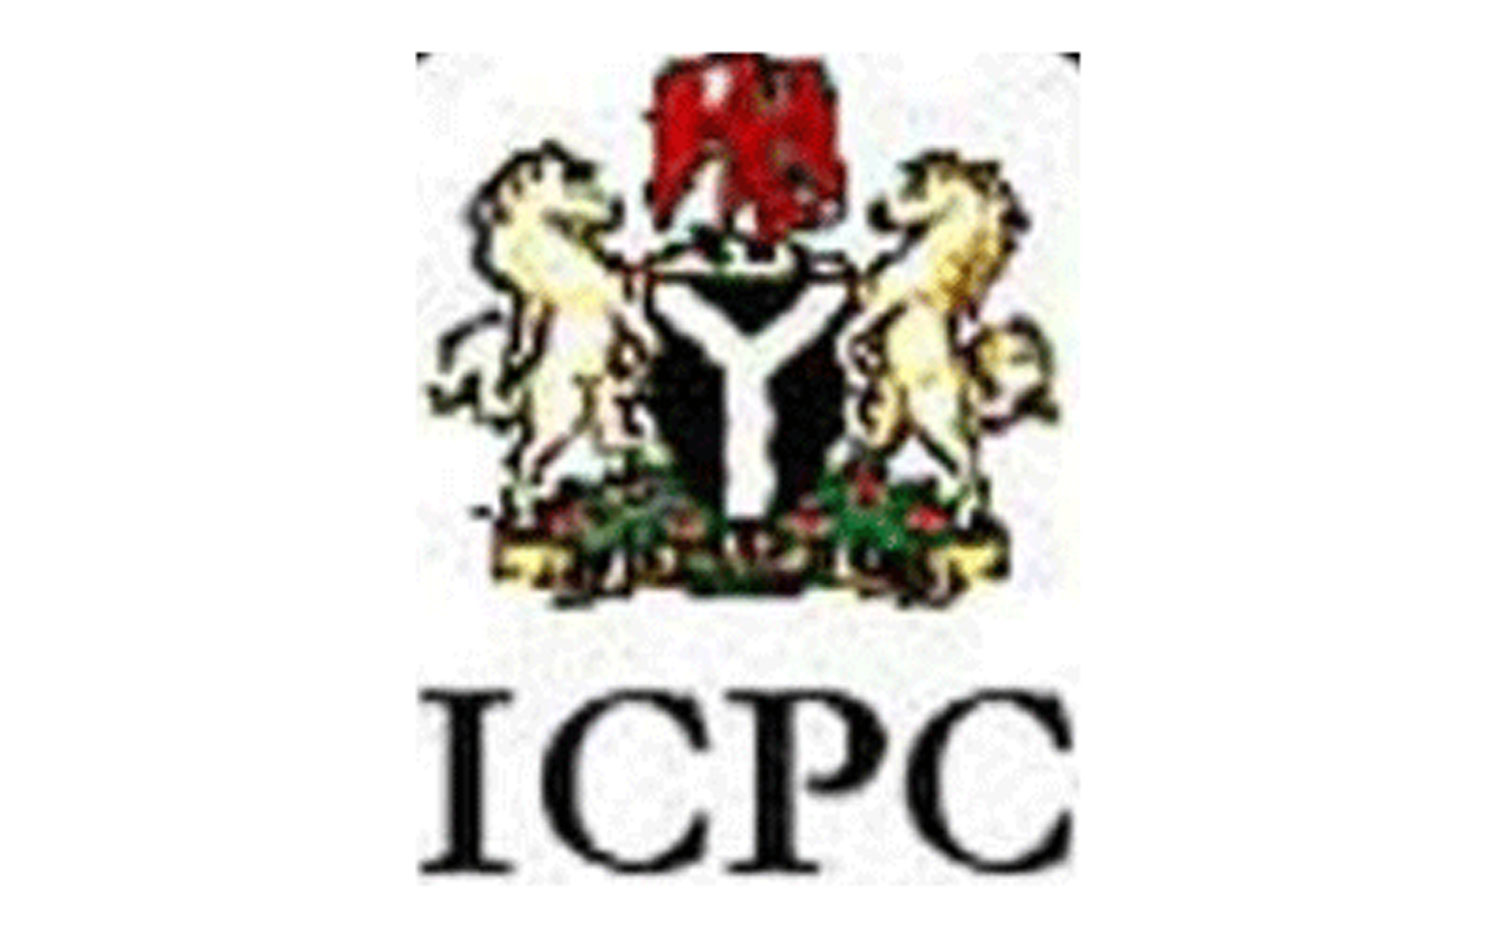 Corruption, major cause of insecurity — ICPC